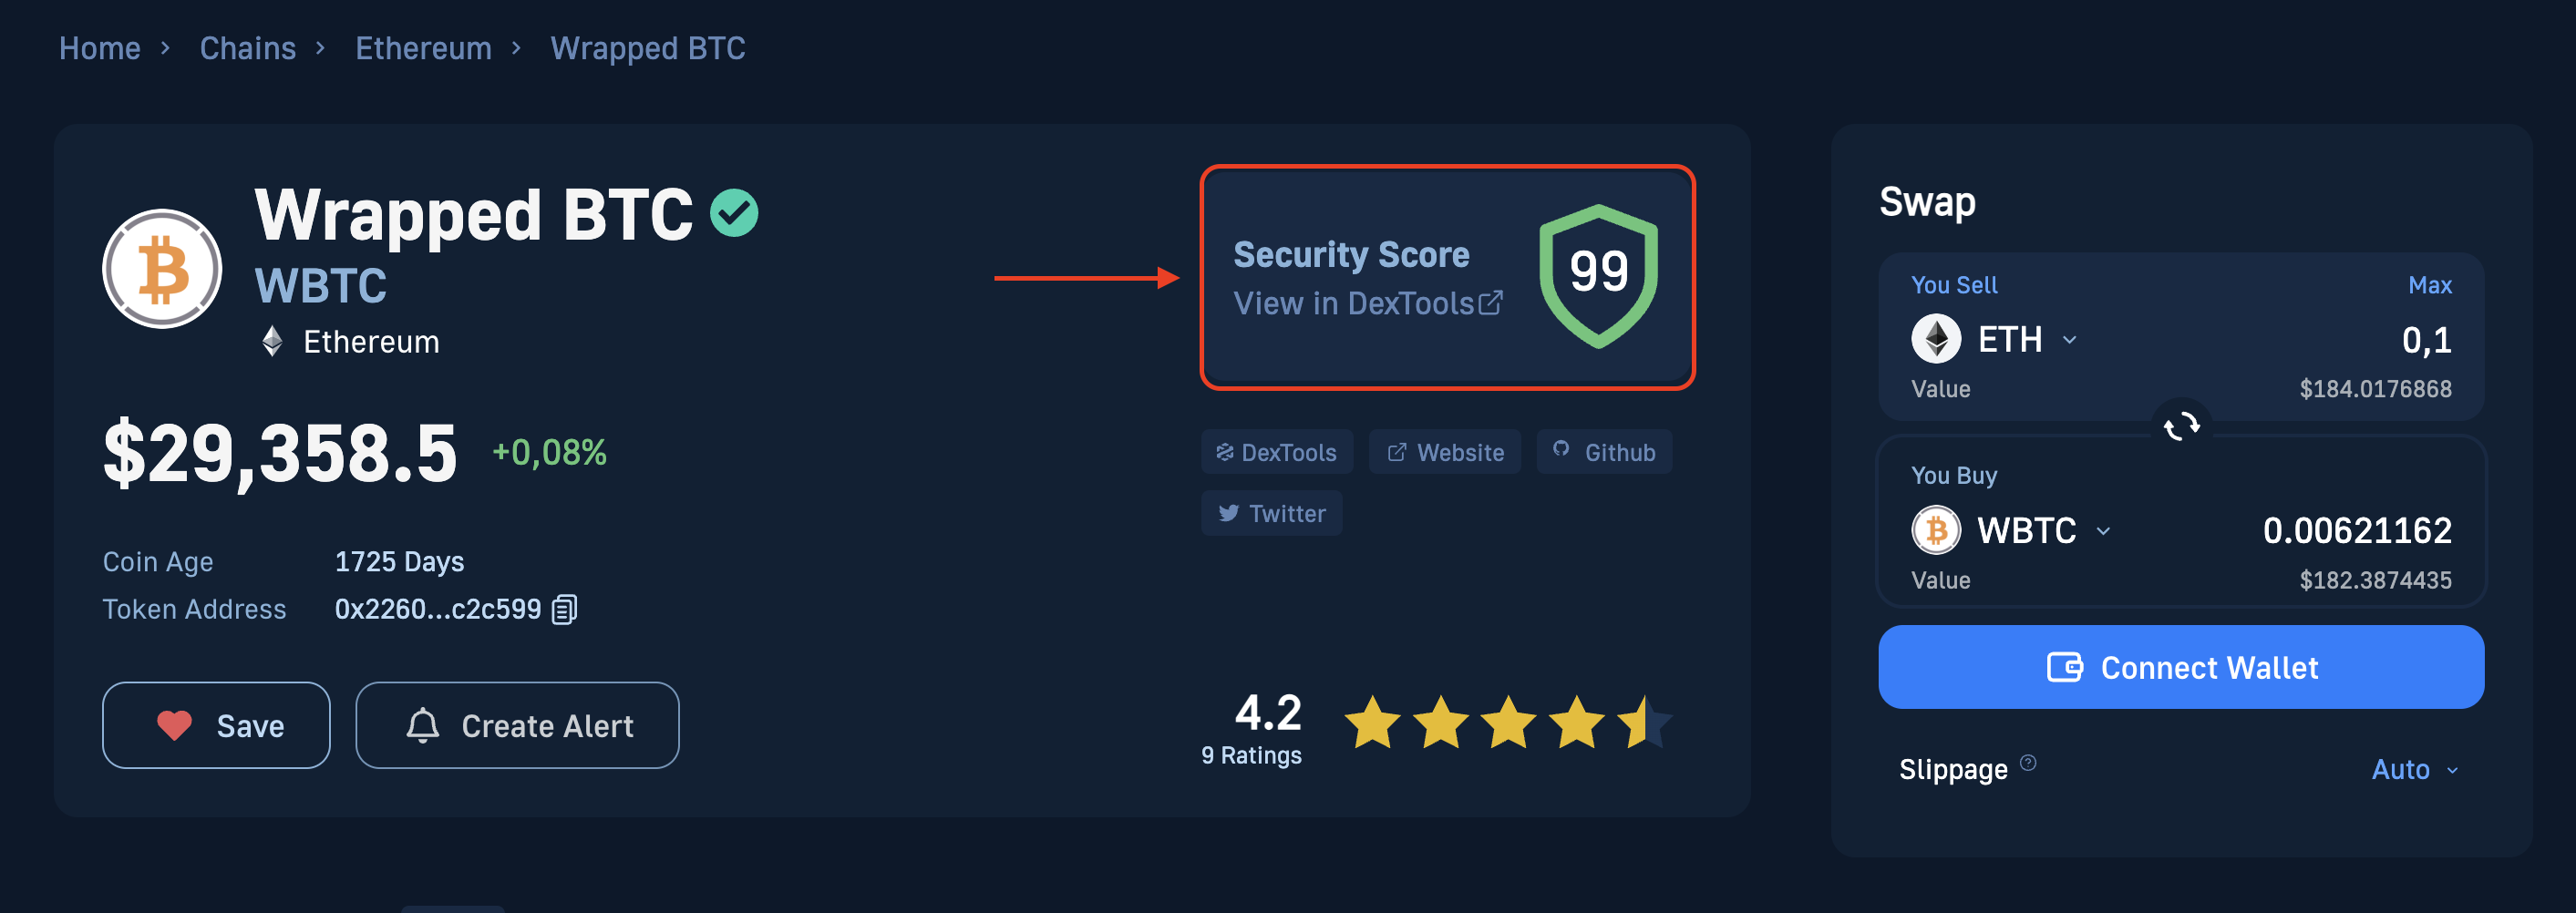 security score on the Moralis Money token pages